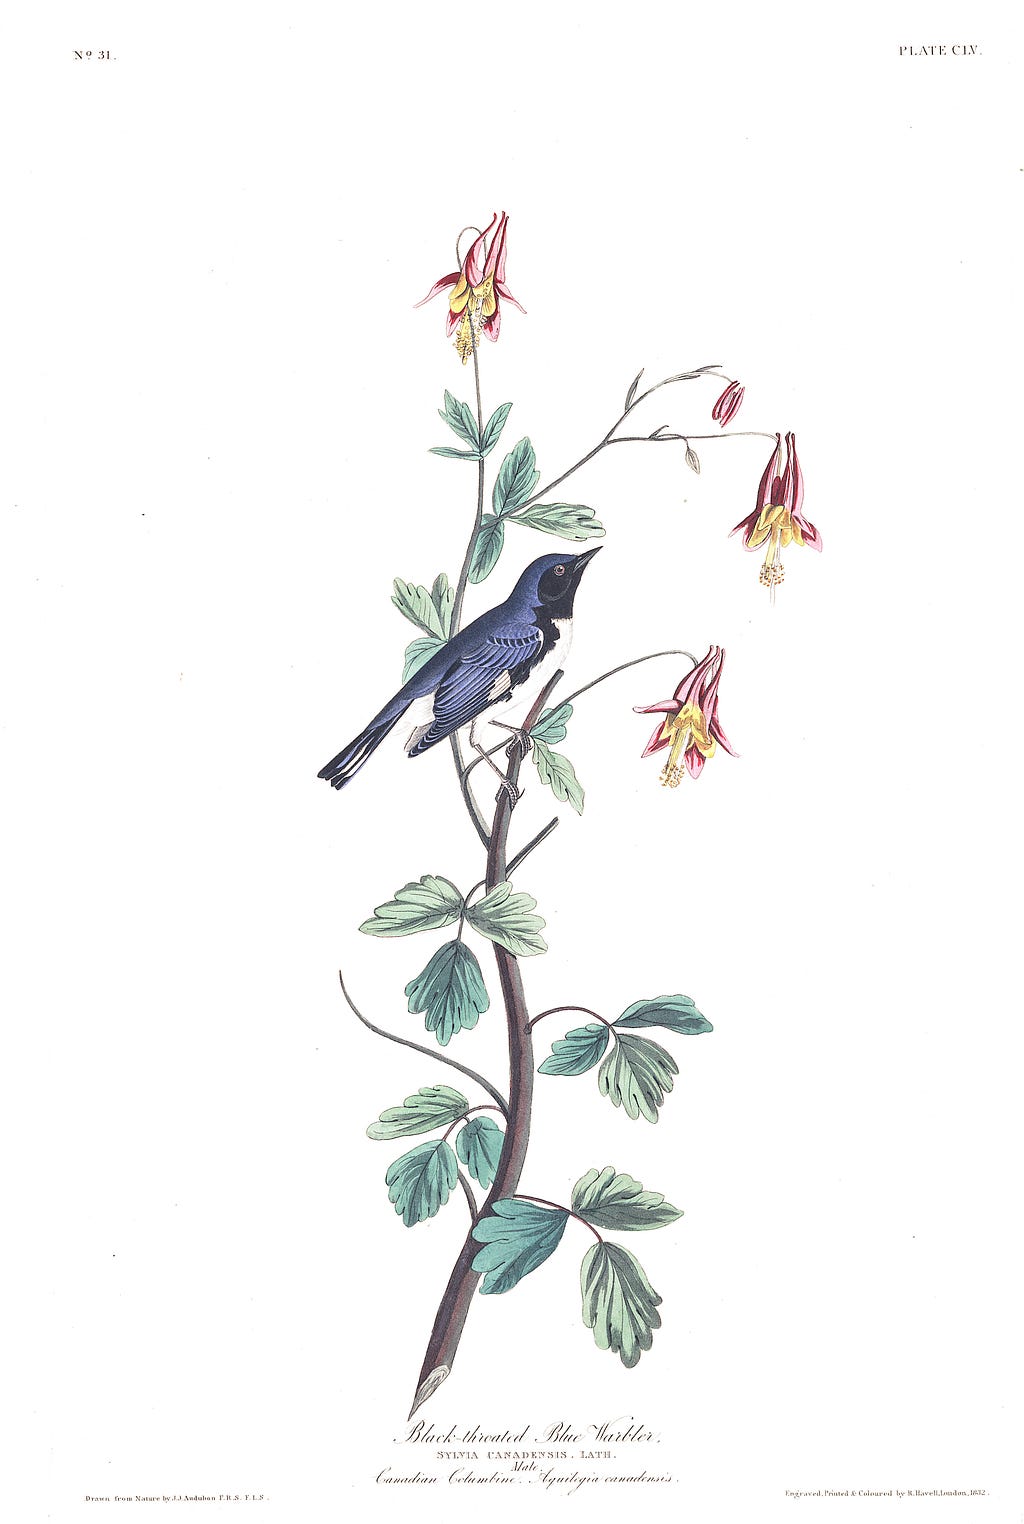 A blue bird with a black throat and white belly sits on a small branch over a white background. Illustrated.